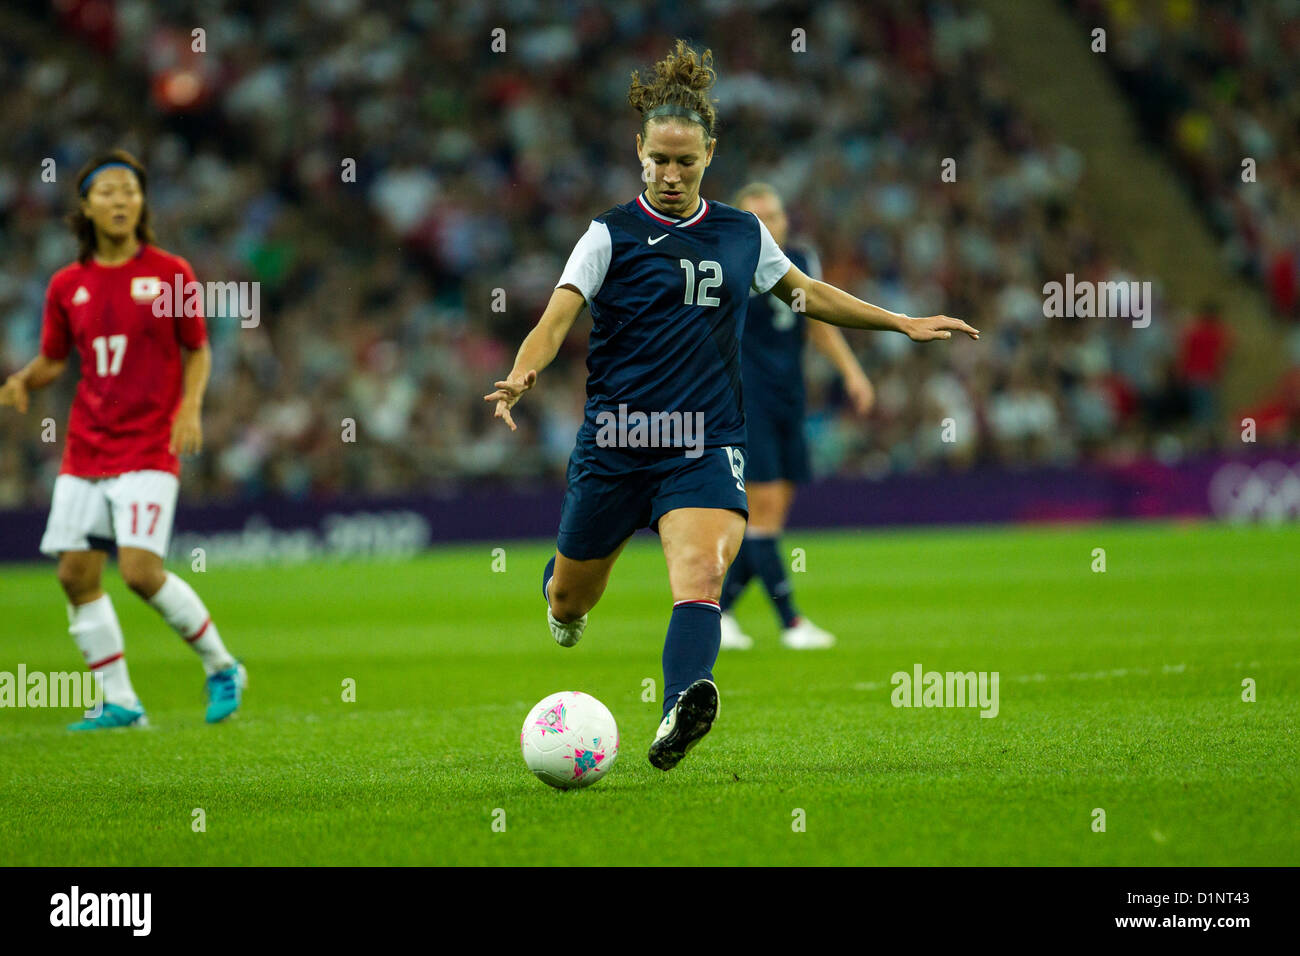 Lauren Cheney (USA)-12, USA wins gold over Japan in Women's Football (soccer) at the Olympic Summer Games, London 2012 Stock Photo